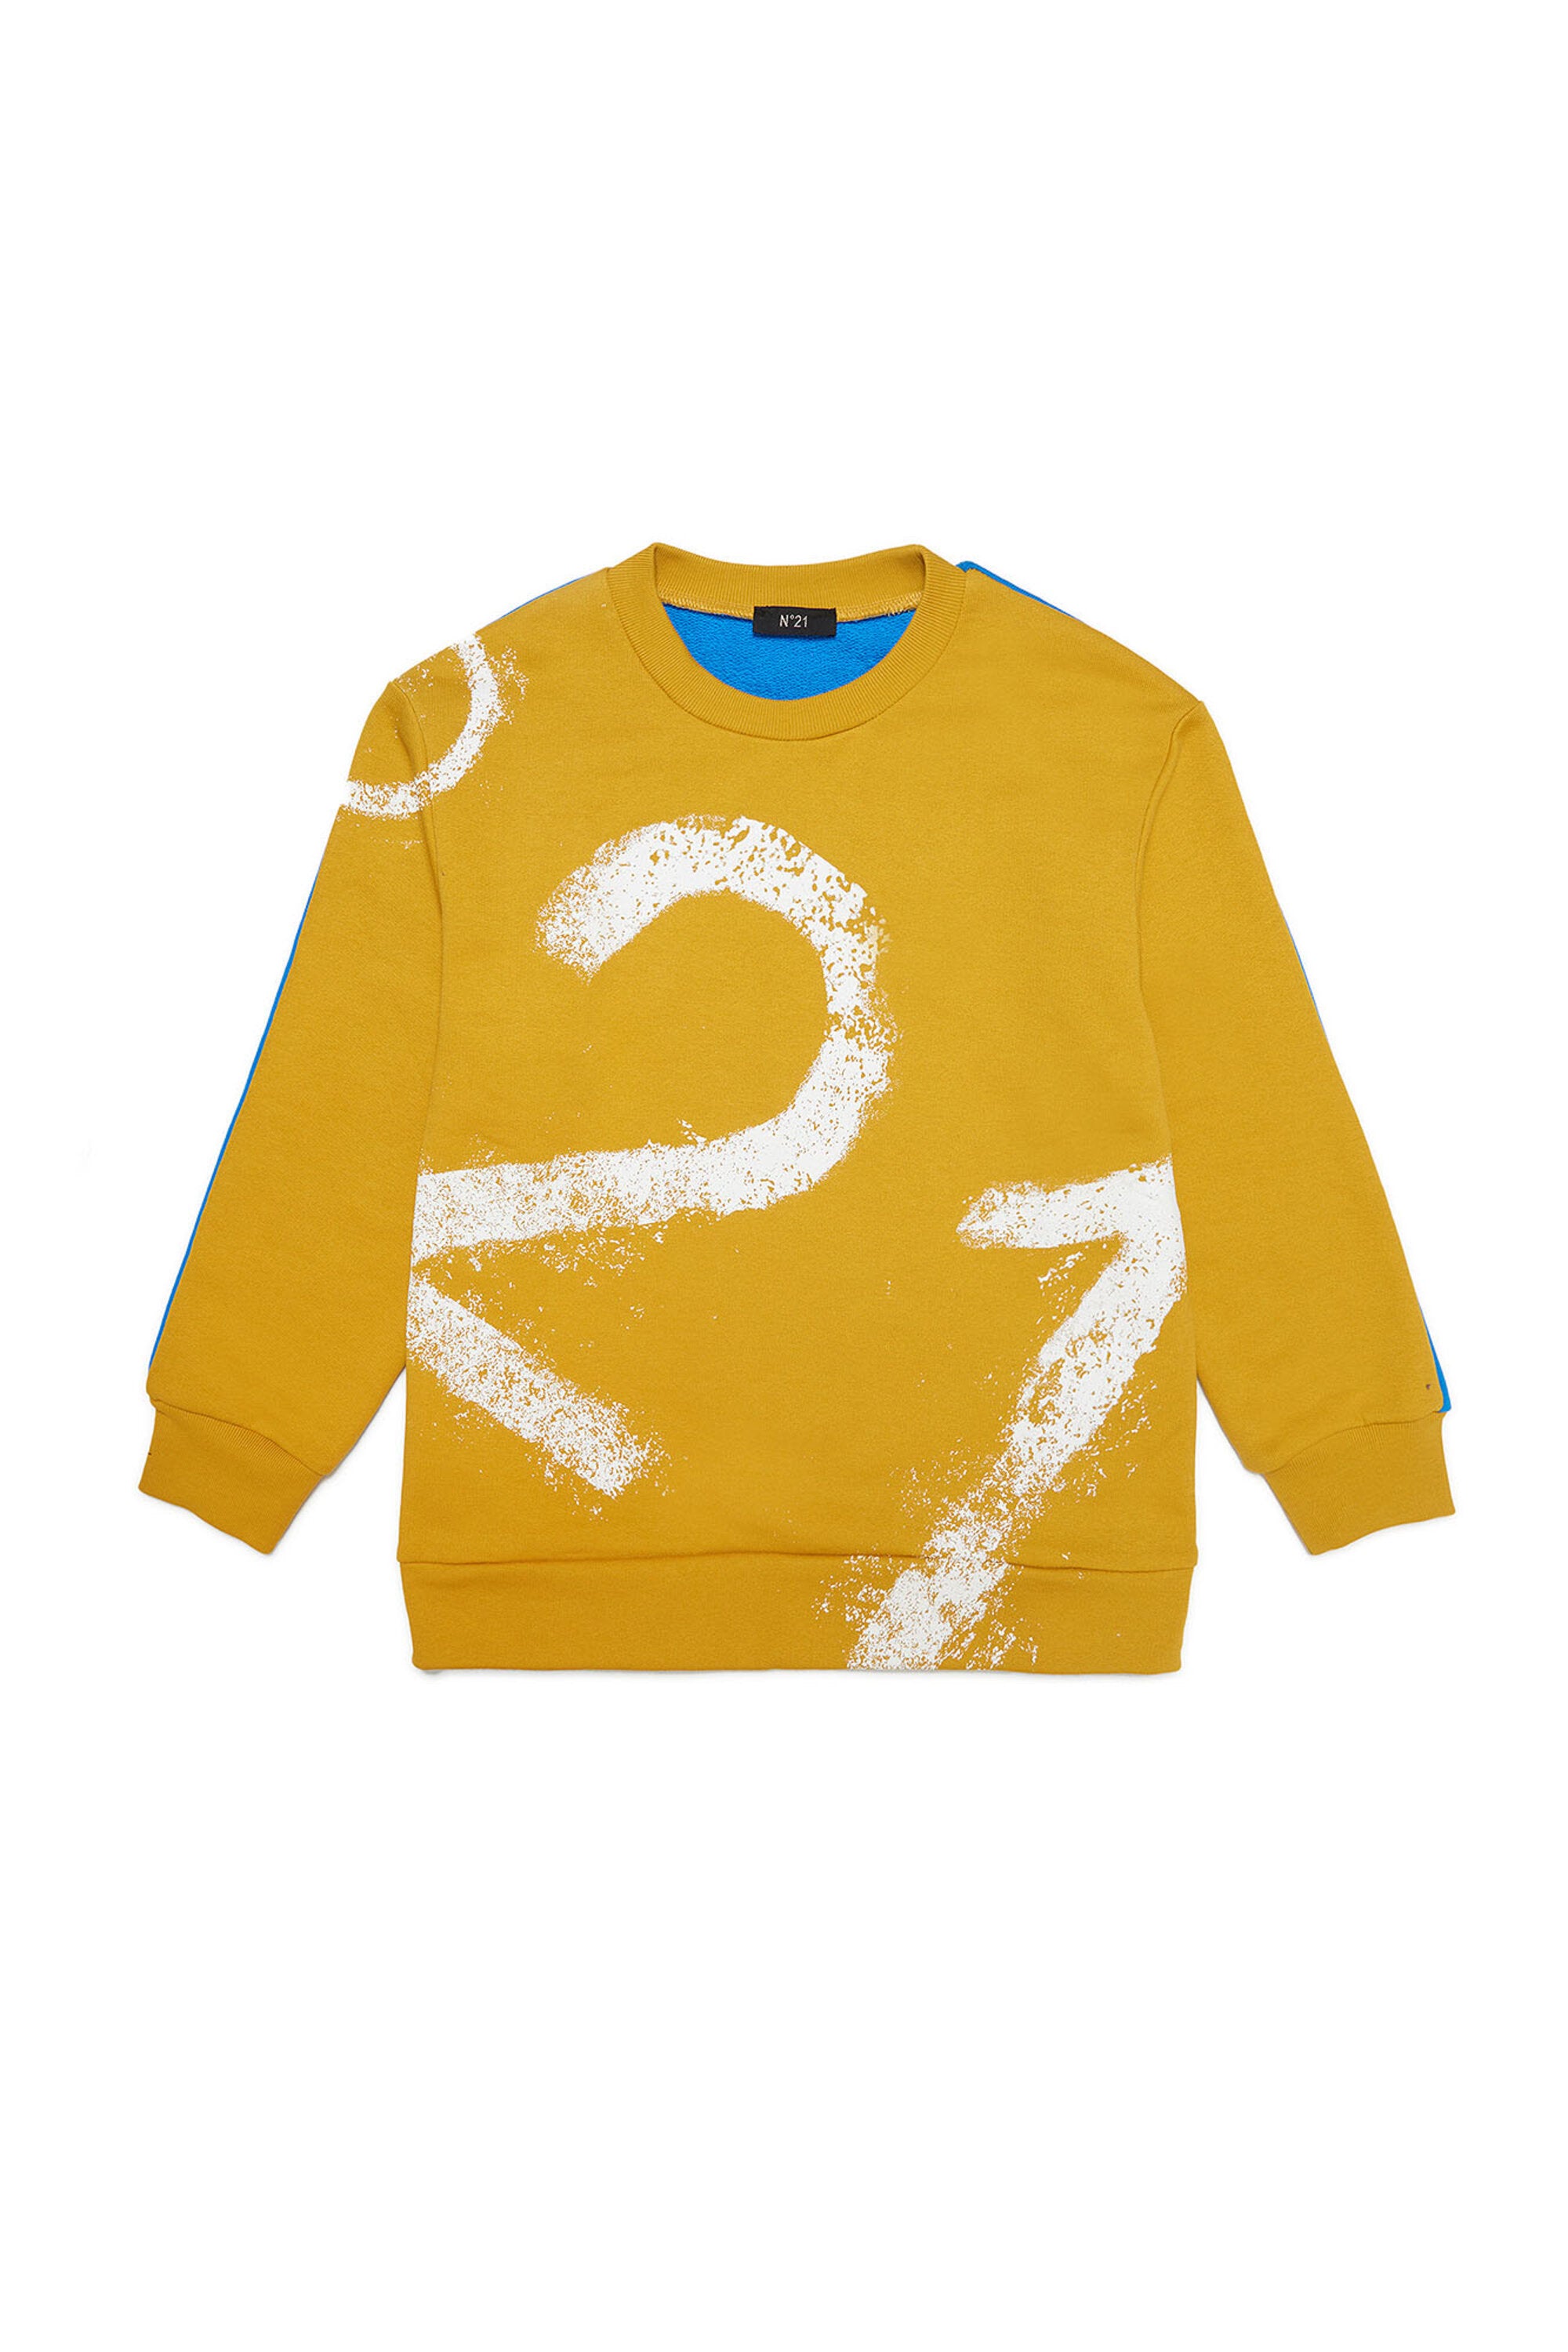 Yellow and light blue crew-neck sweatshirt with vintage effect logo